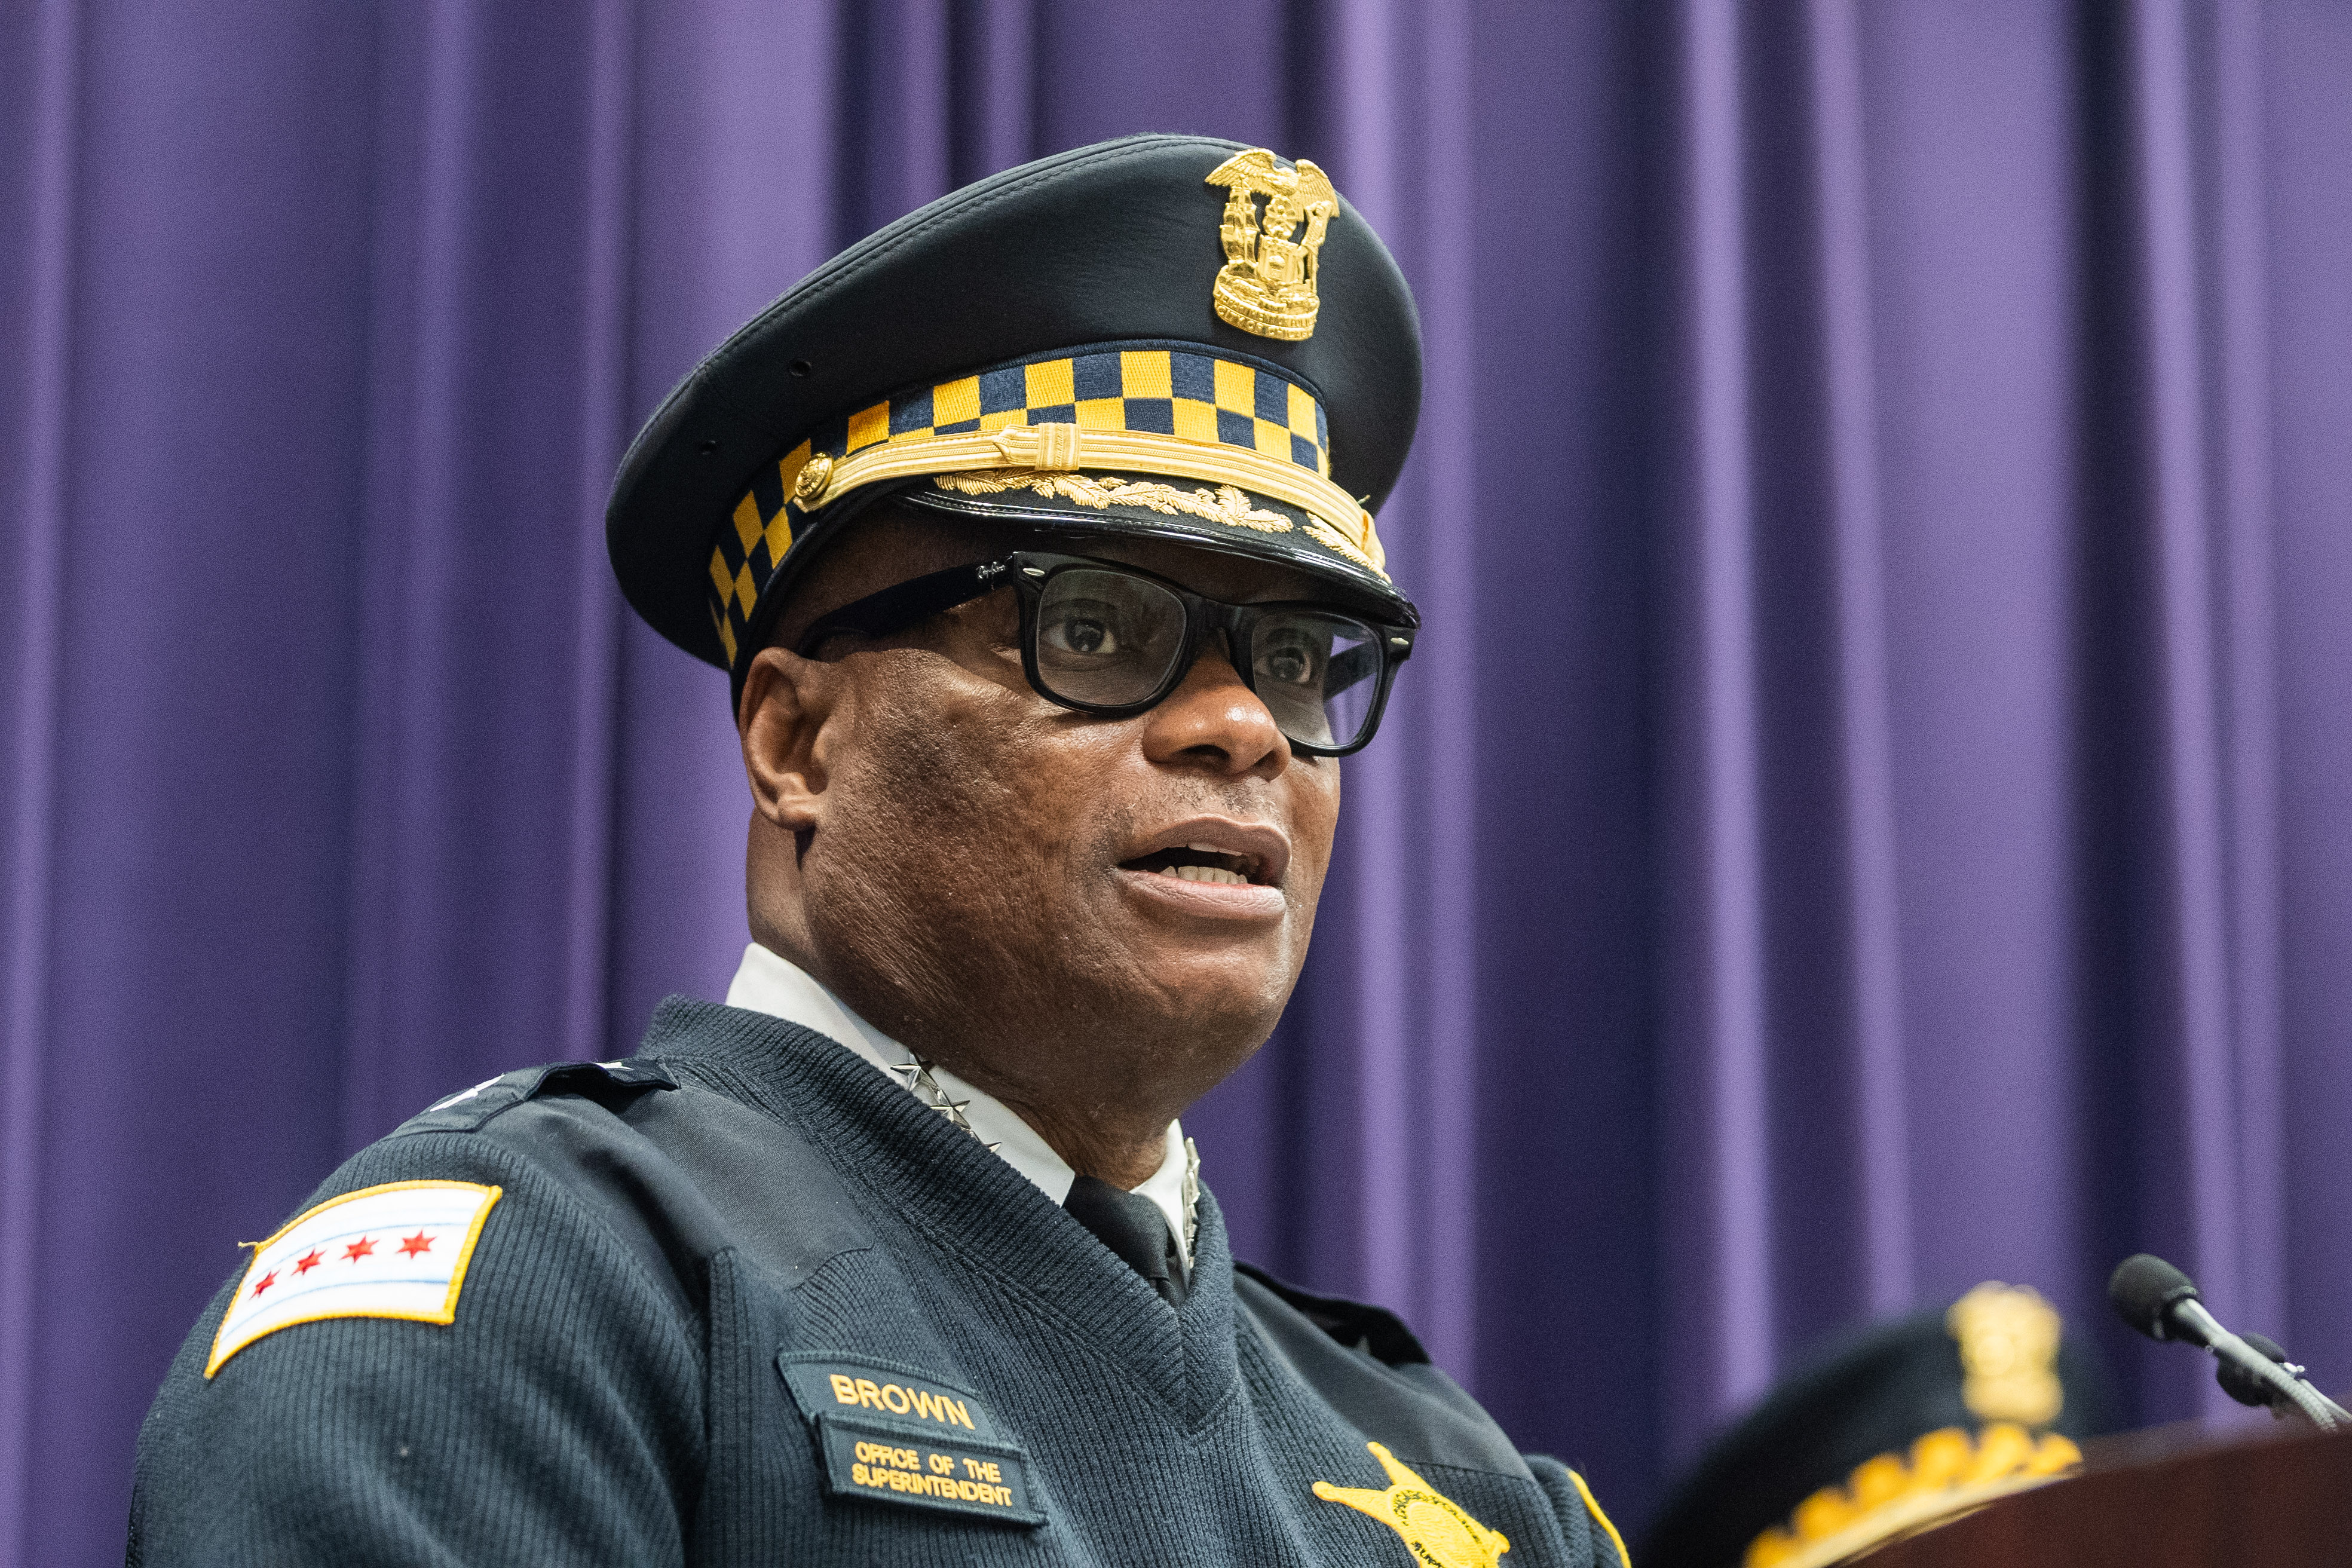 Chicago Police Supt. David Brown speaks during a press conference at the Chicago Police Department headquarters in the Bronzeville neighborhood, Friday afternoon, Jan. 21, 2022.